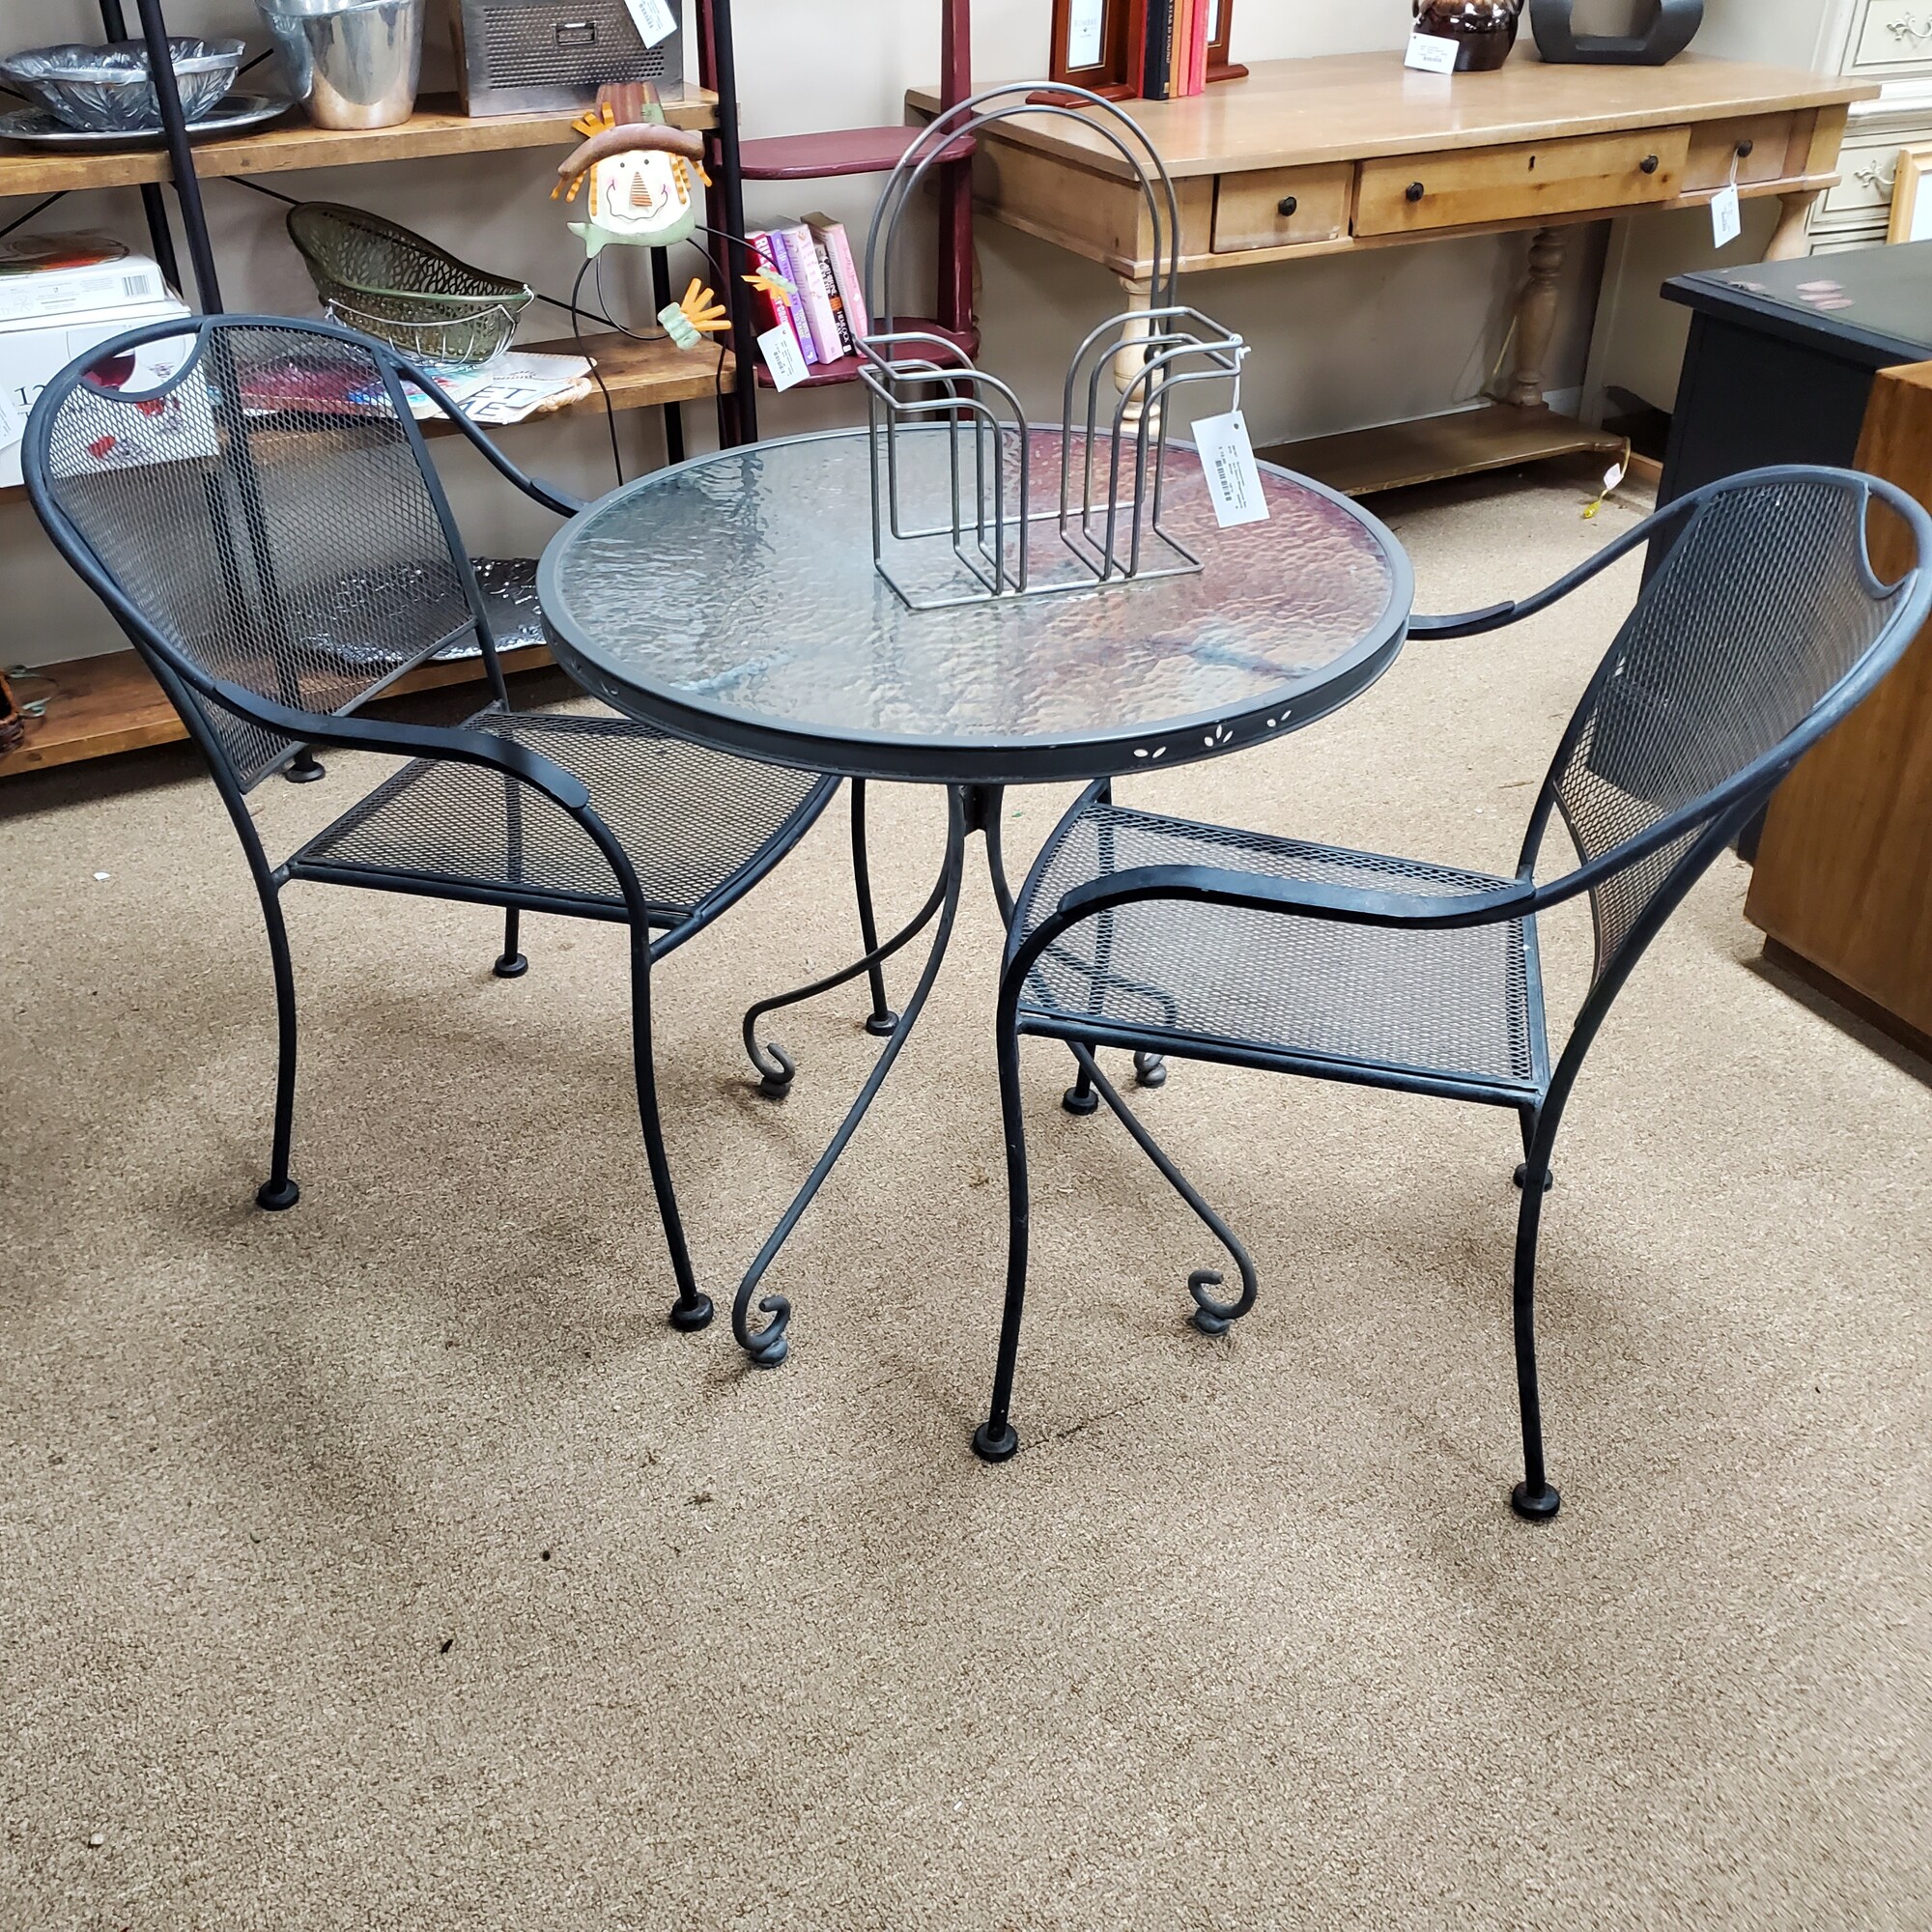 Bistro Table + 2 Chairs, Size: 30D